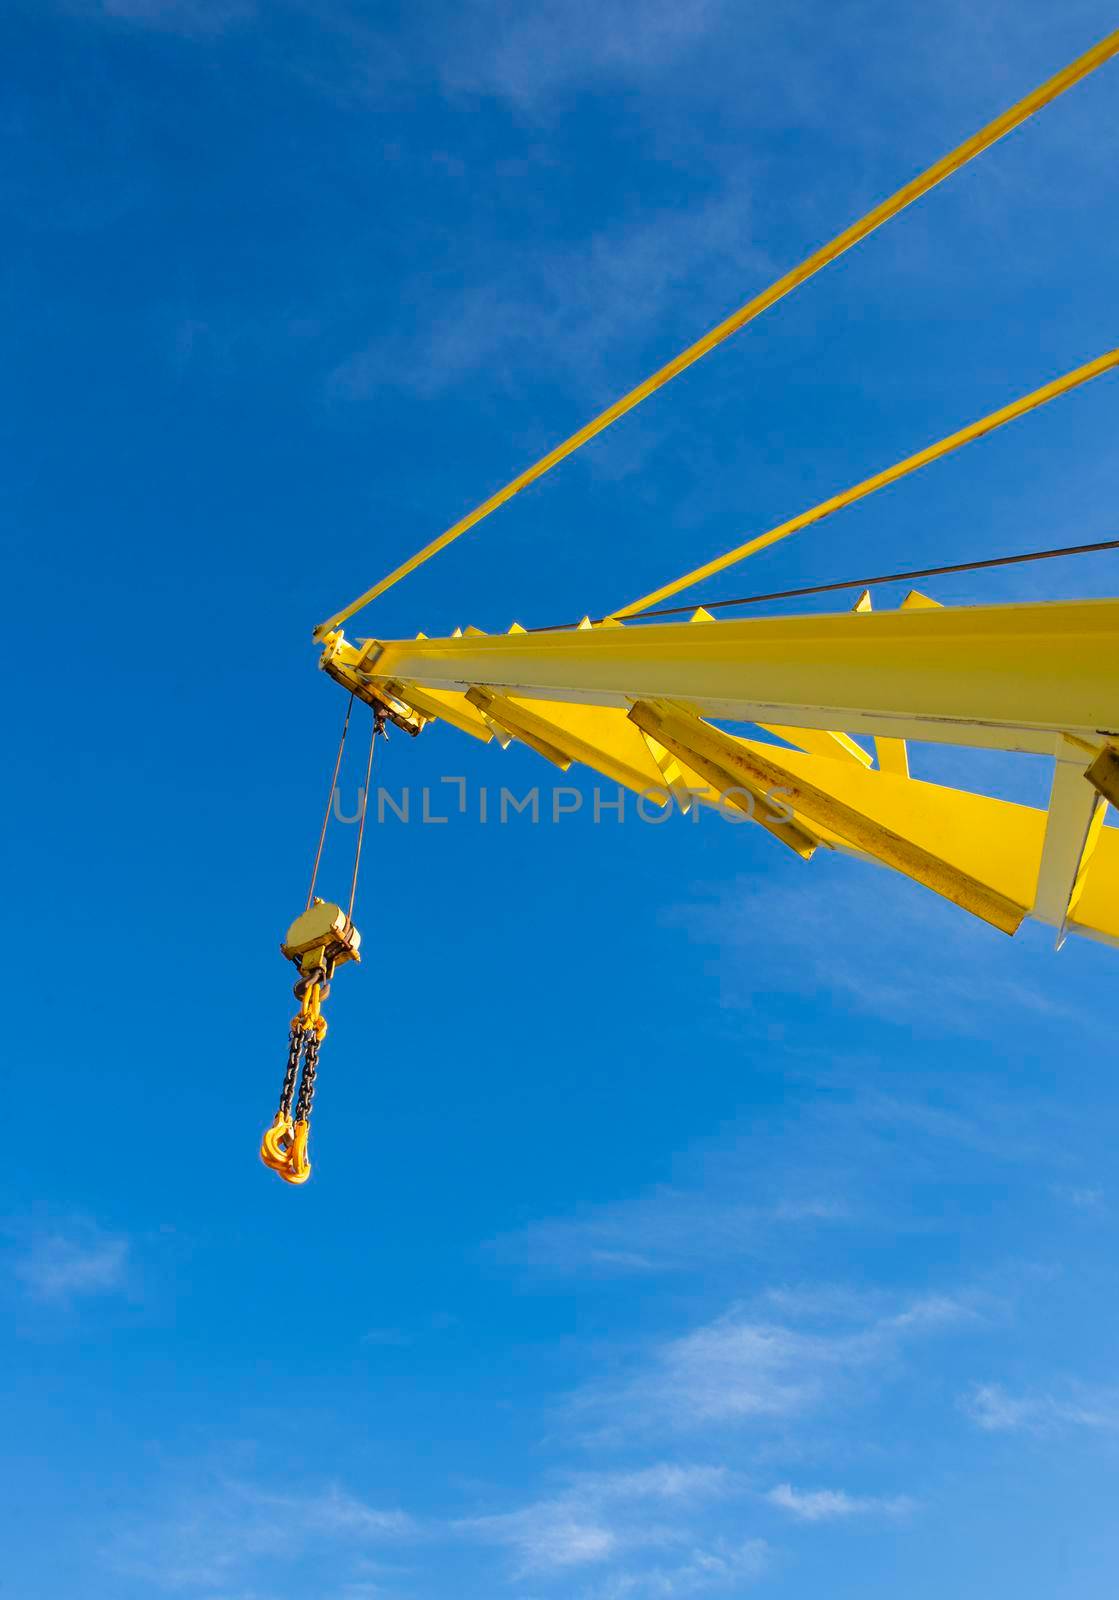 Large extended industrial crane jib boom arm against a blue sky background with block tackle